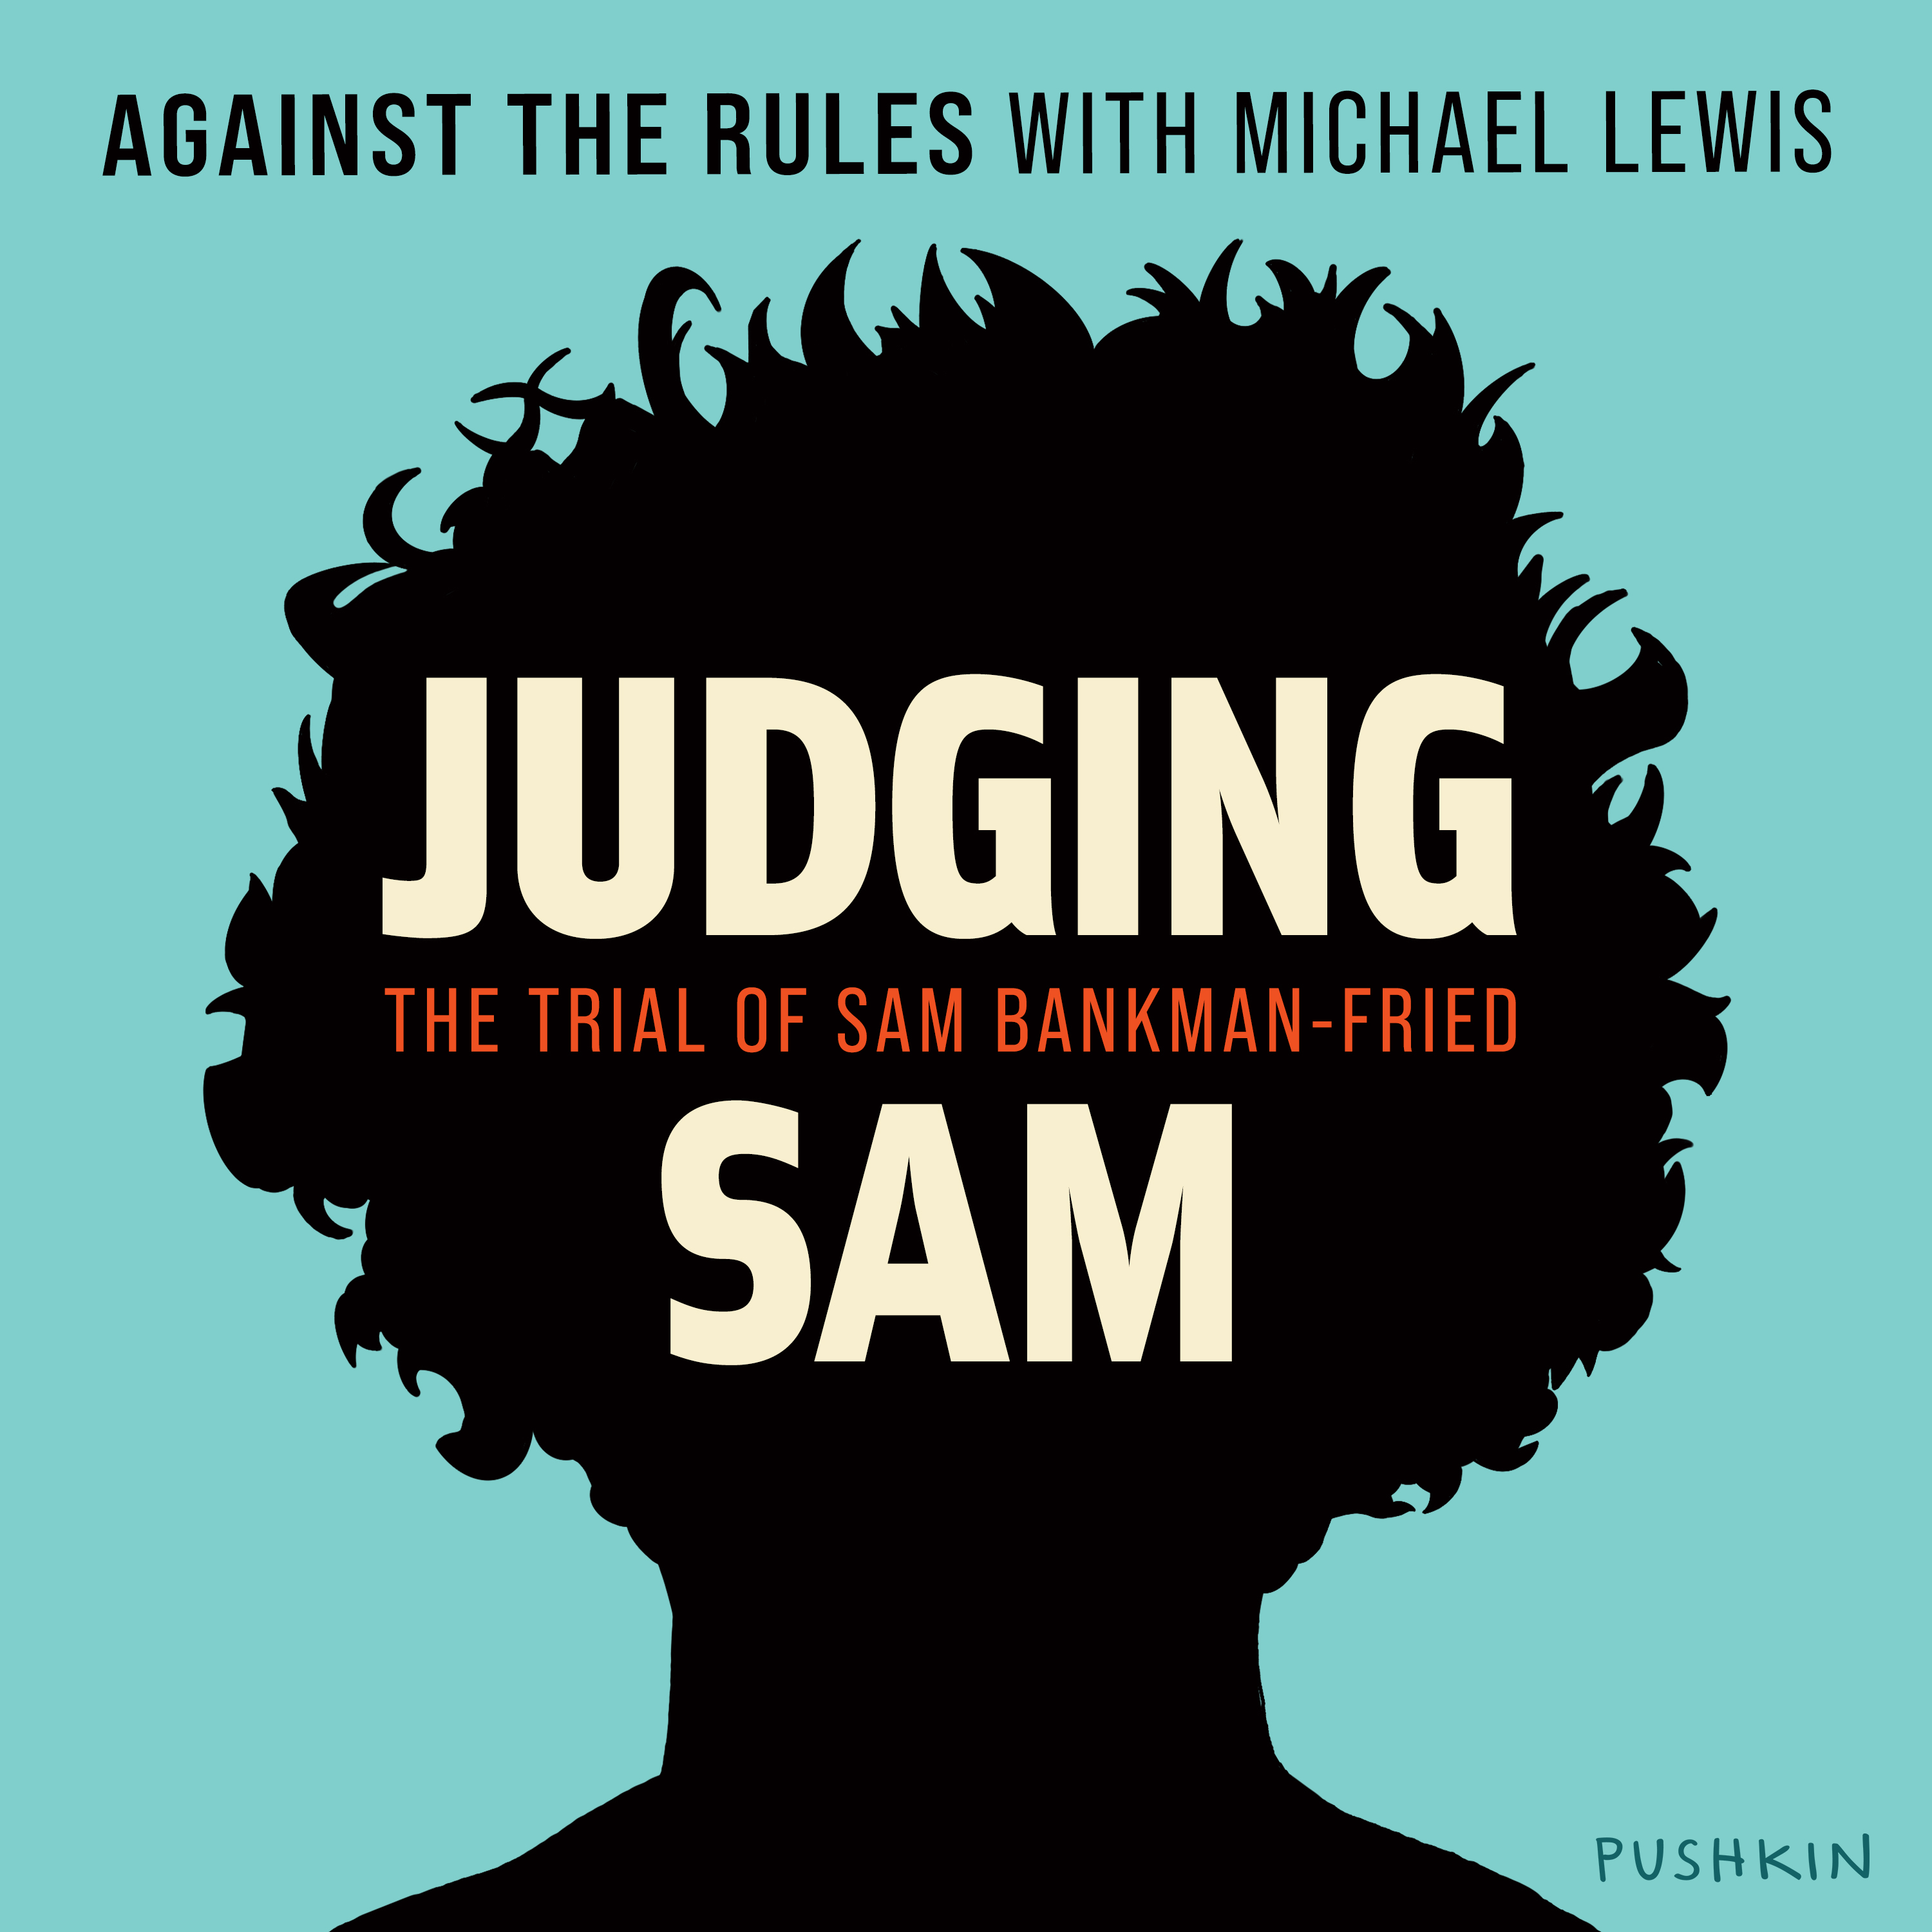 Special Episode: The Trial of Sam Bankman-Fried